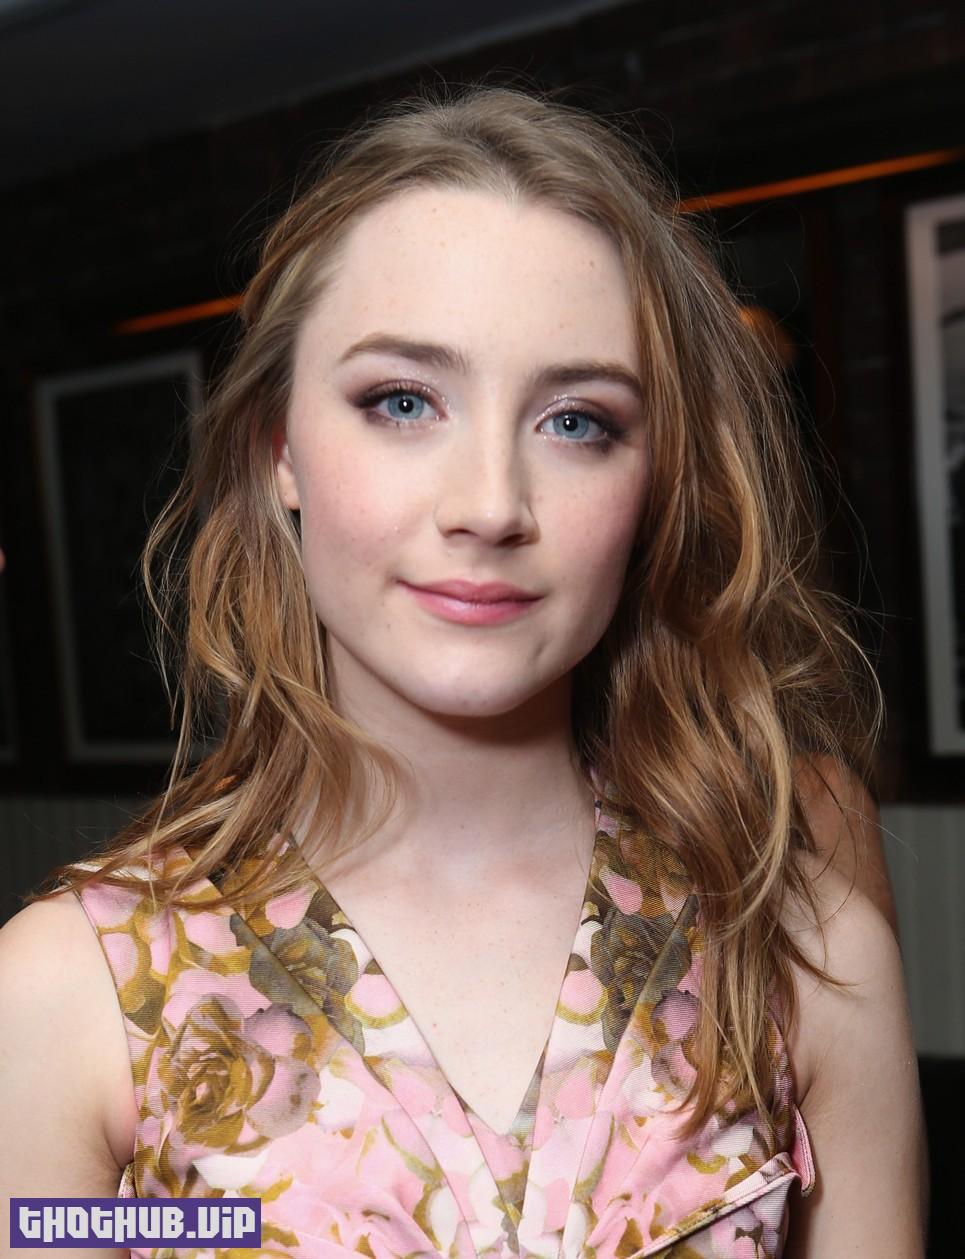 TORONTO, ON - SEPTEMBER 09: Actress Saoirse Ronan attends the WestEnd Films and Grey Goose Vodka party for 